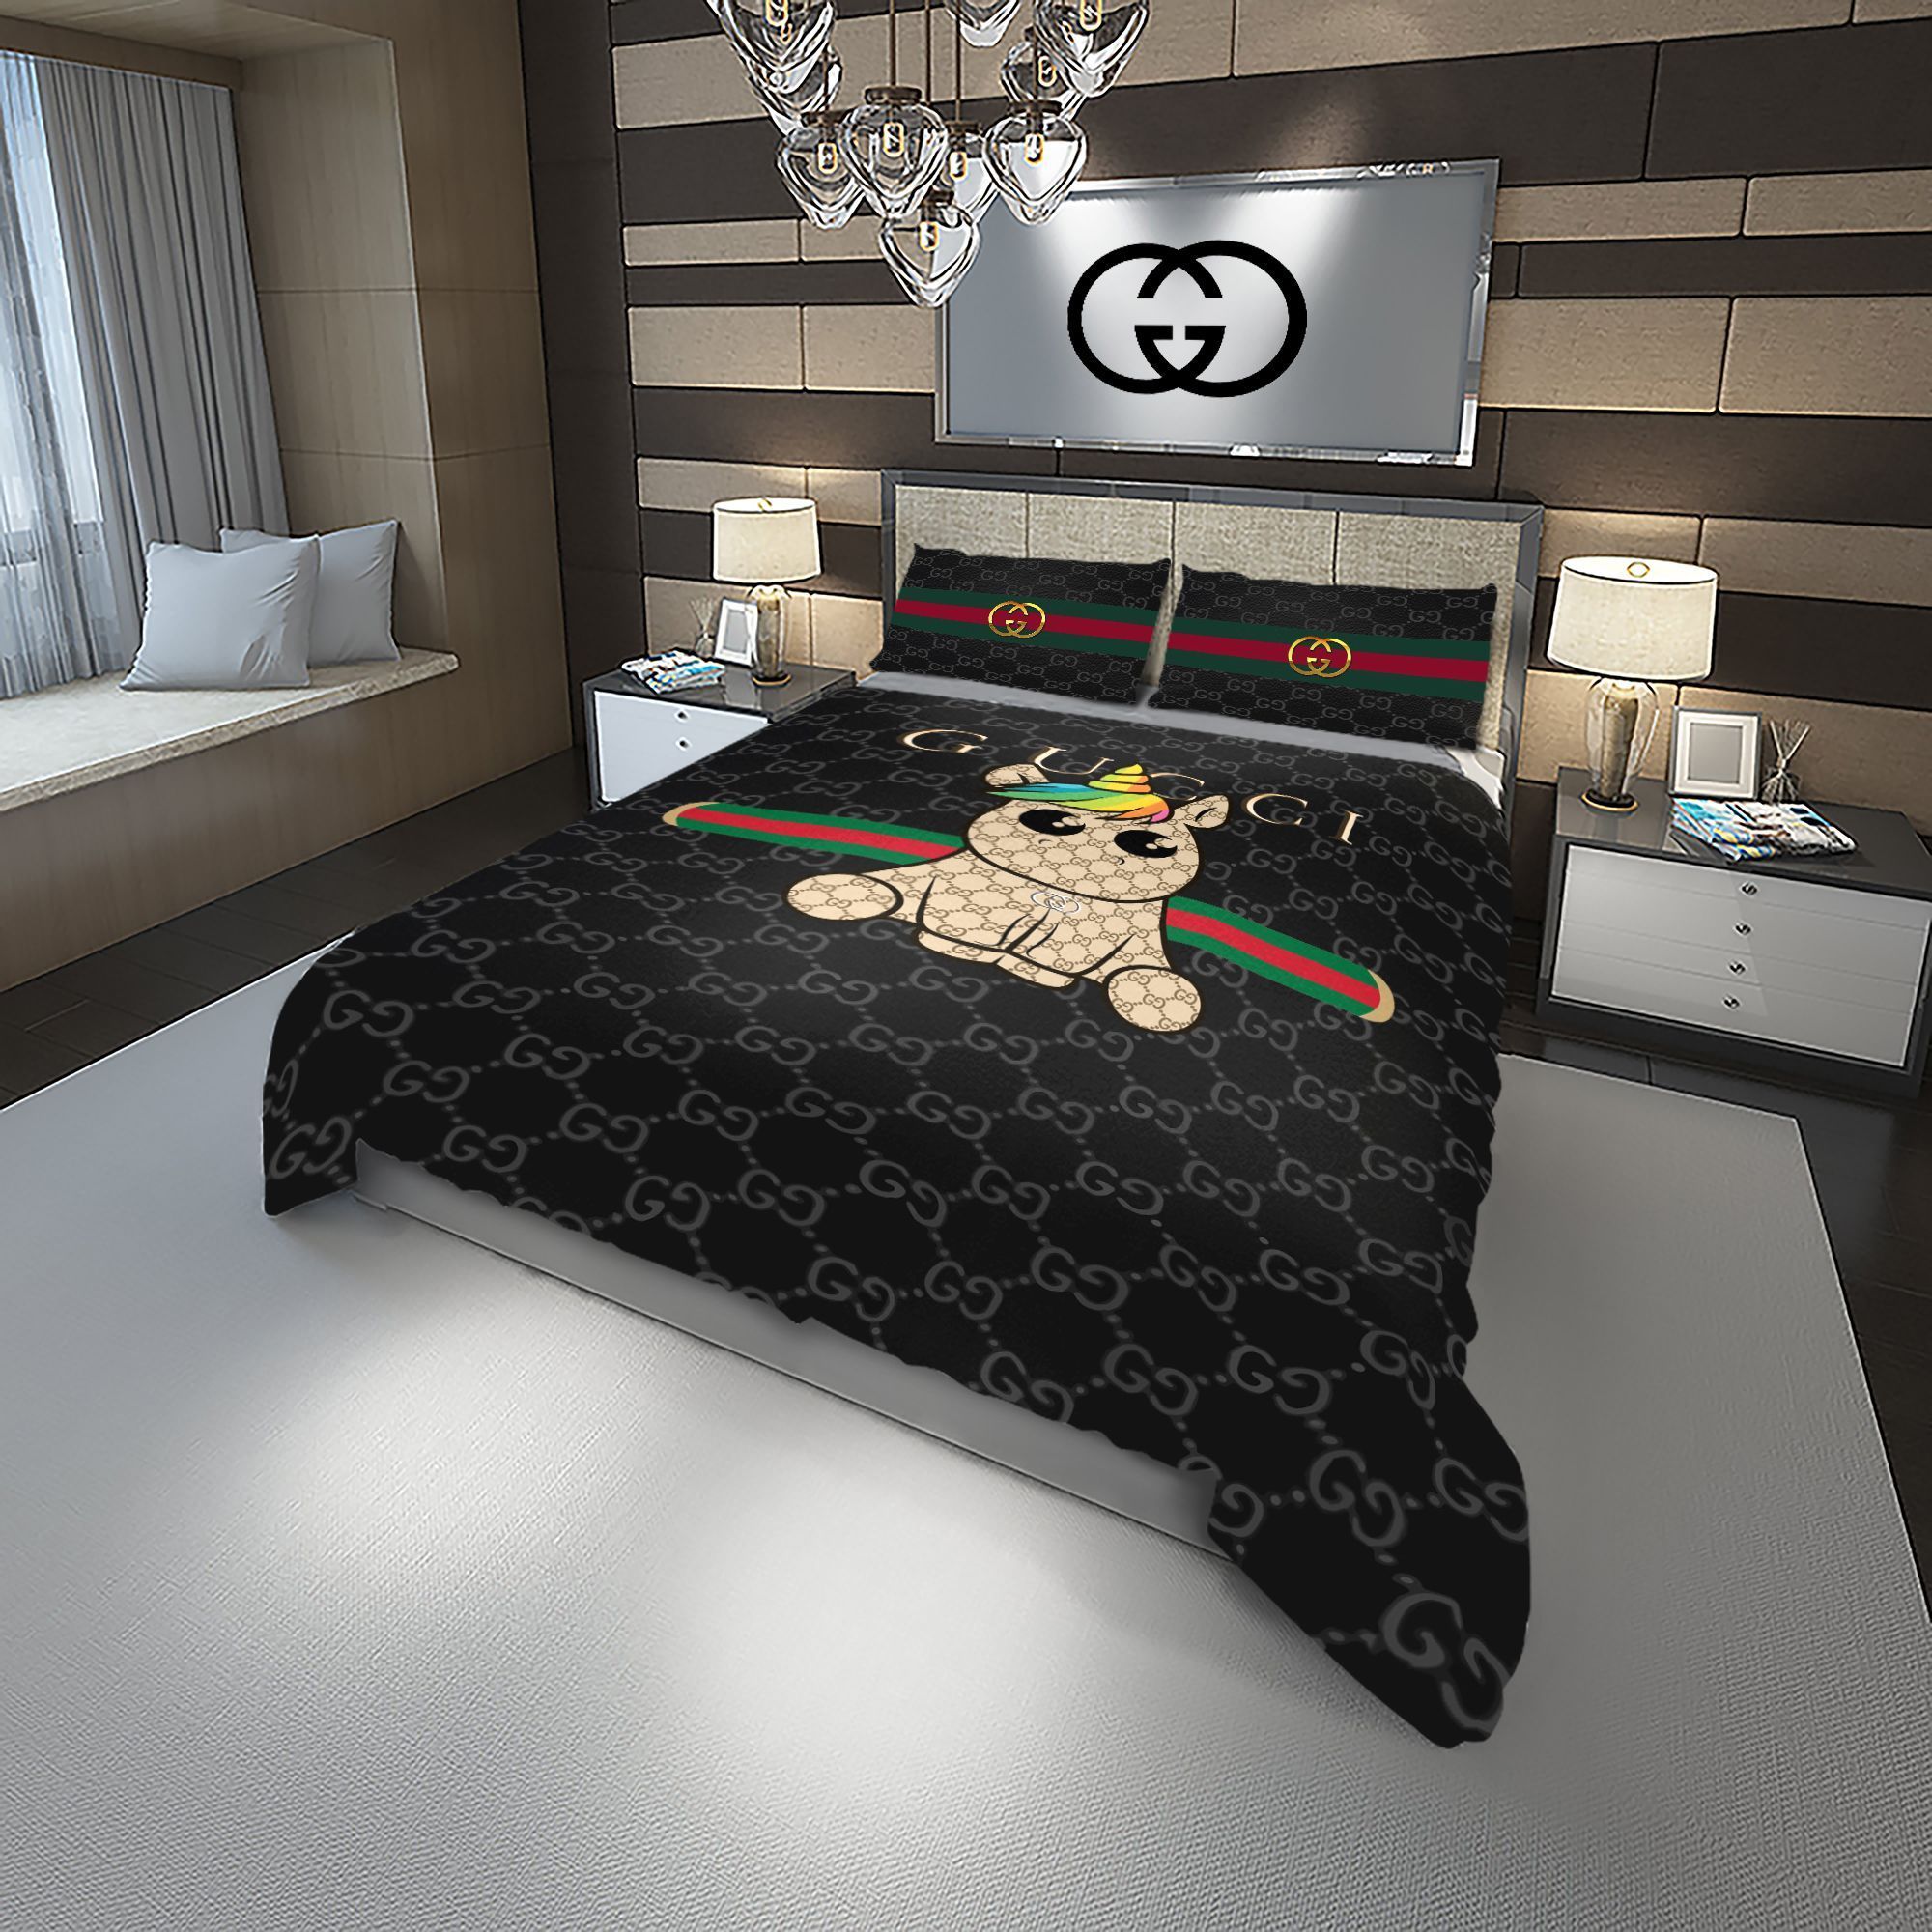 Let me show you about some luxury brand bedding set 2022 85